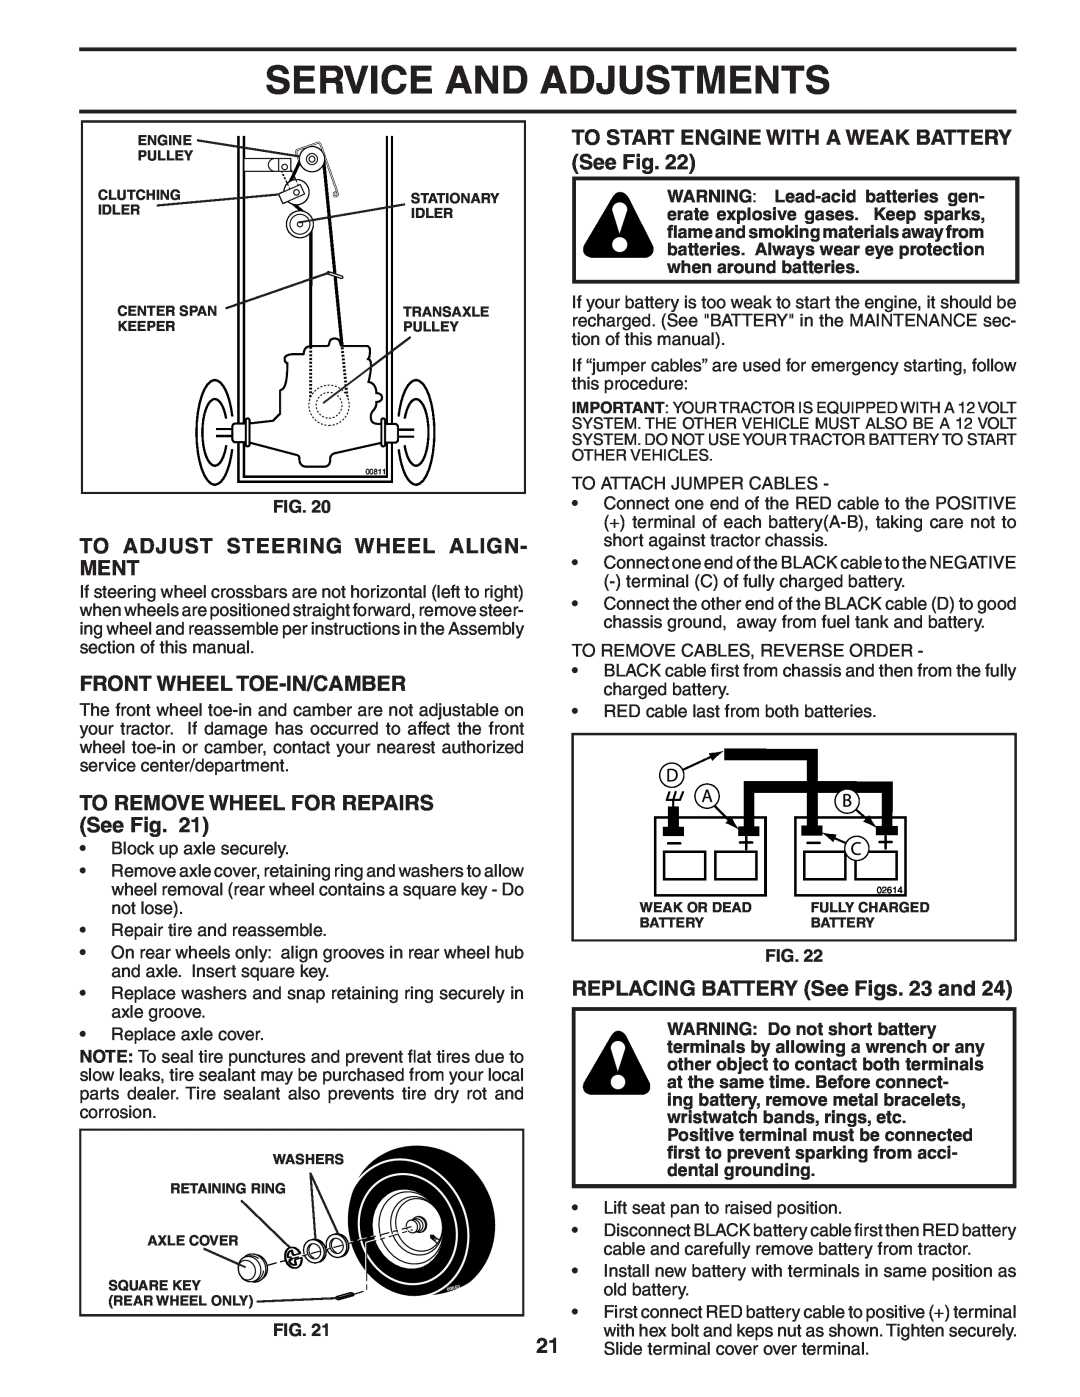 Poulan 192666 TO START ENGINE WITH A WEAK BATTERY See Fig, To Adjust Steering Wheel Align- Ment, Front Wheel Toe-In/Camber 